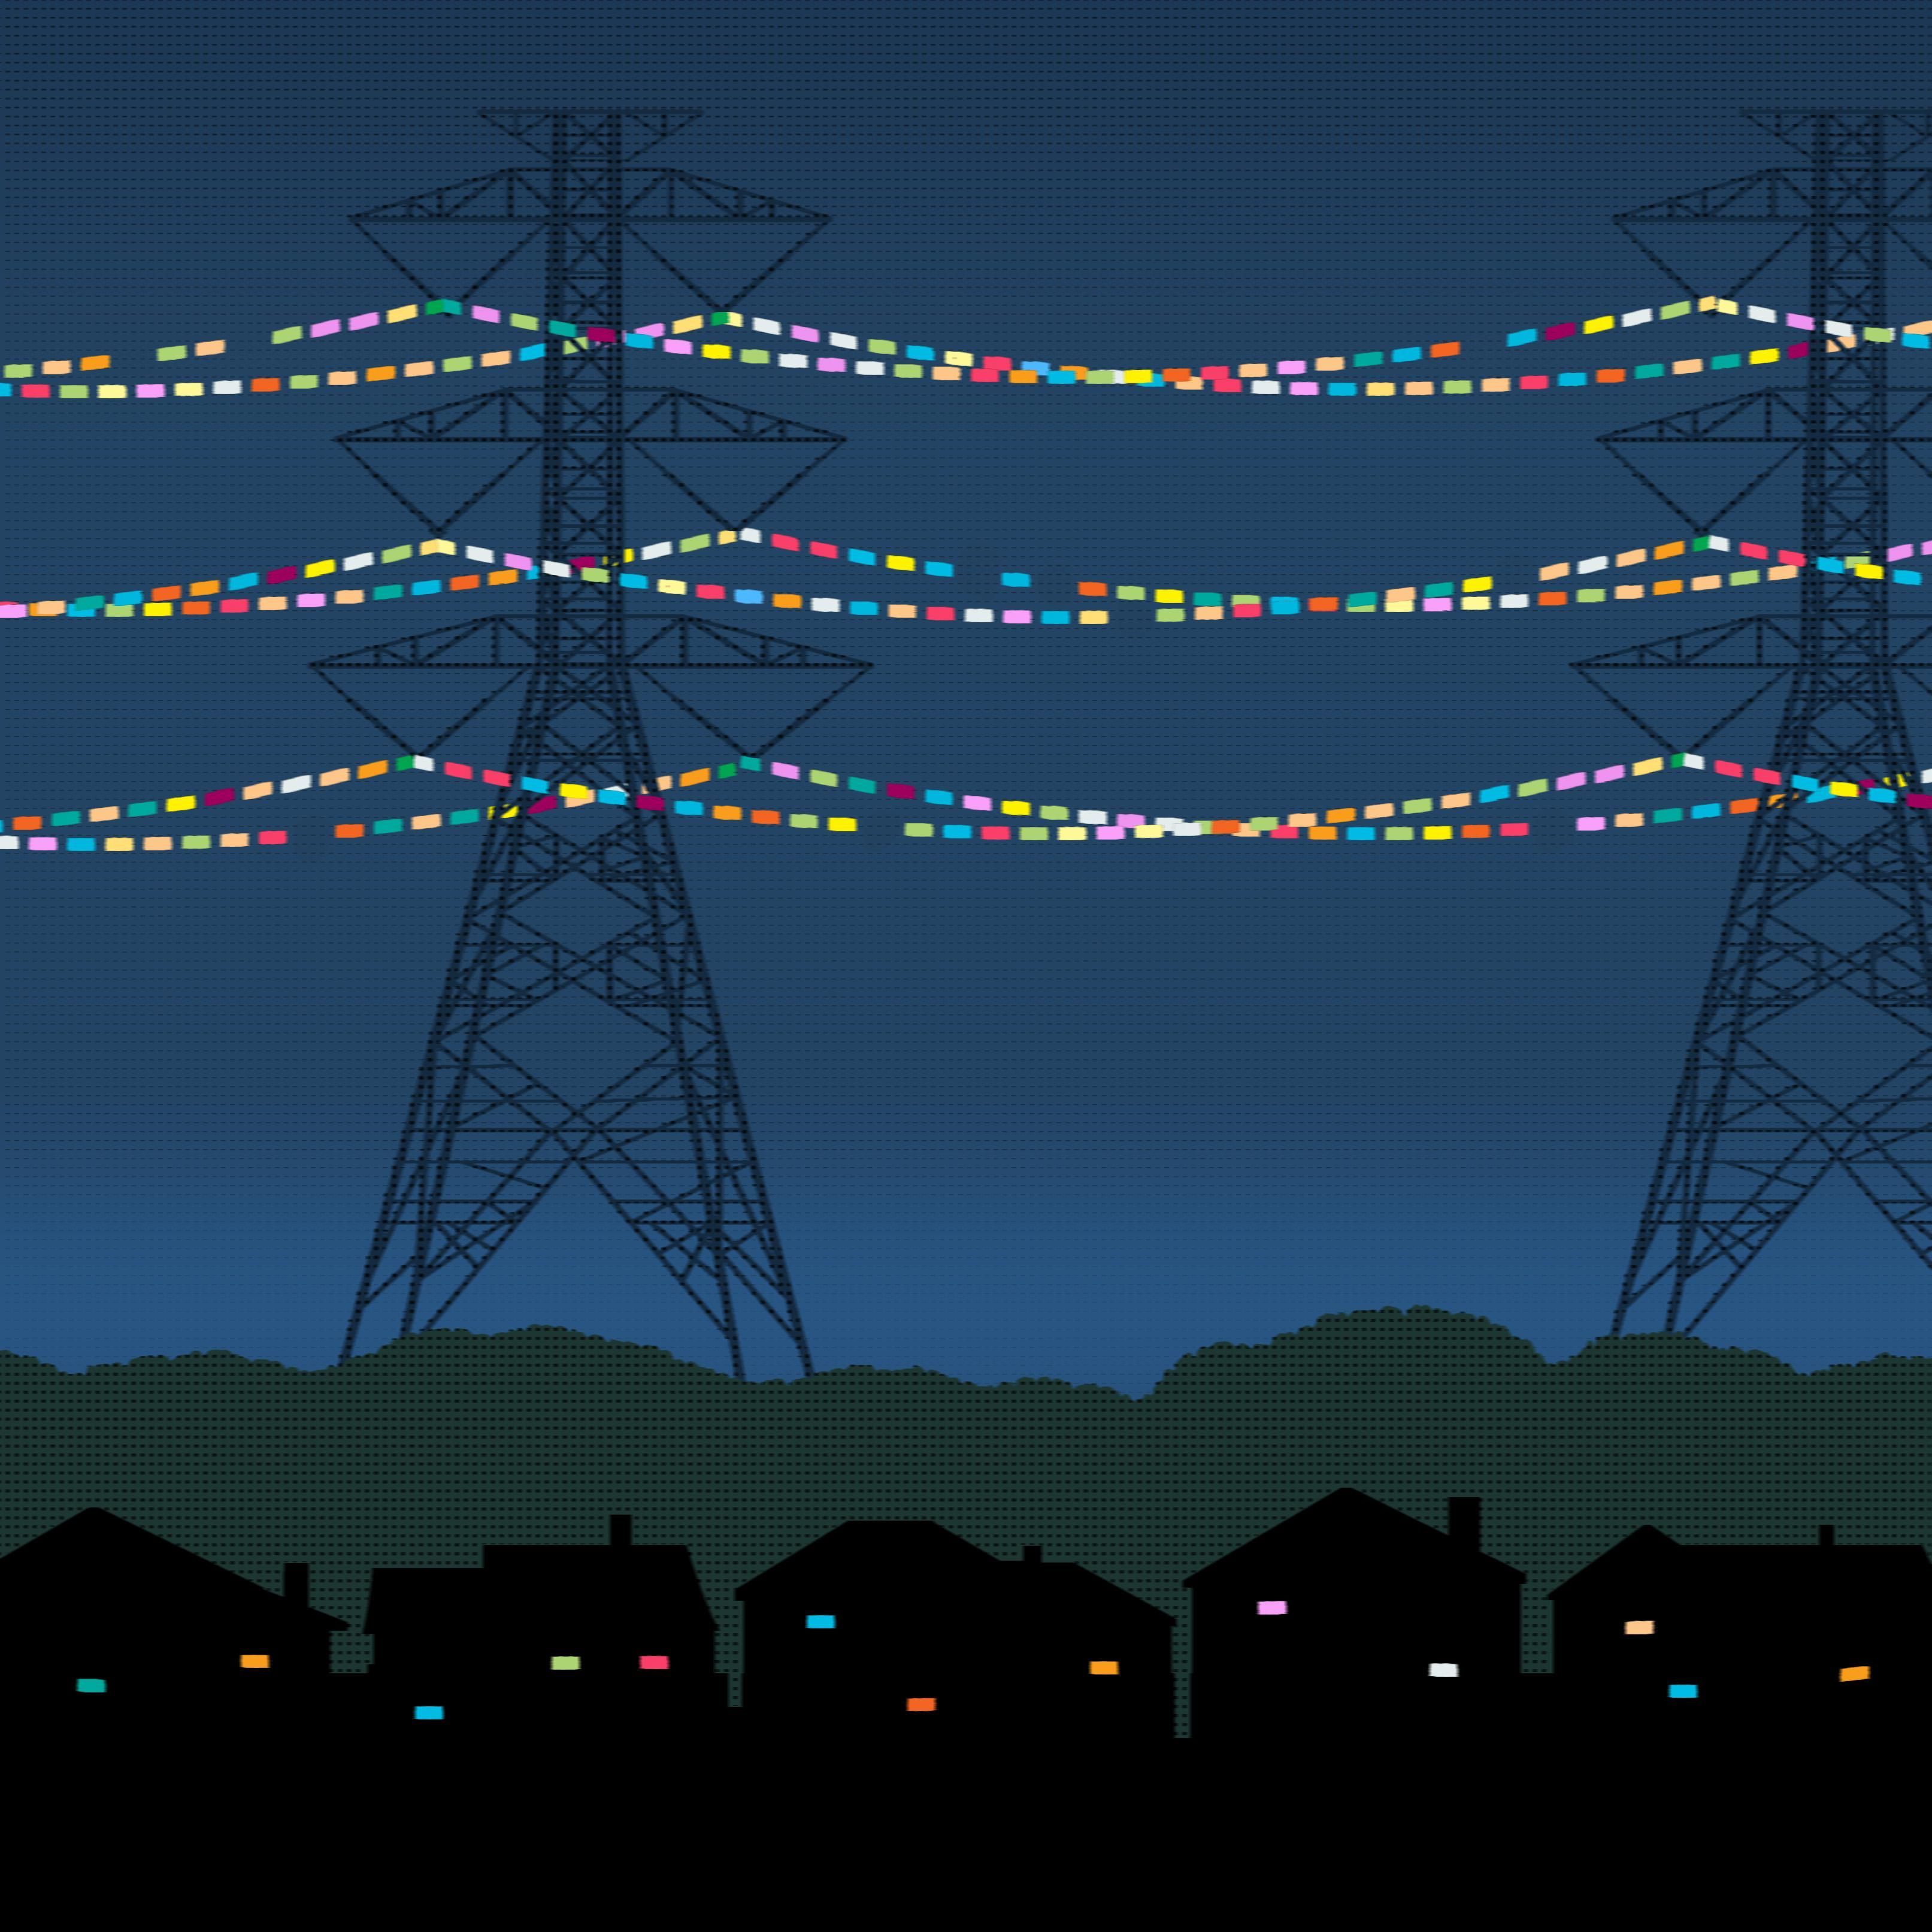 How to Prevent Blackouts by Packetizing the Power Grid